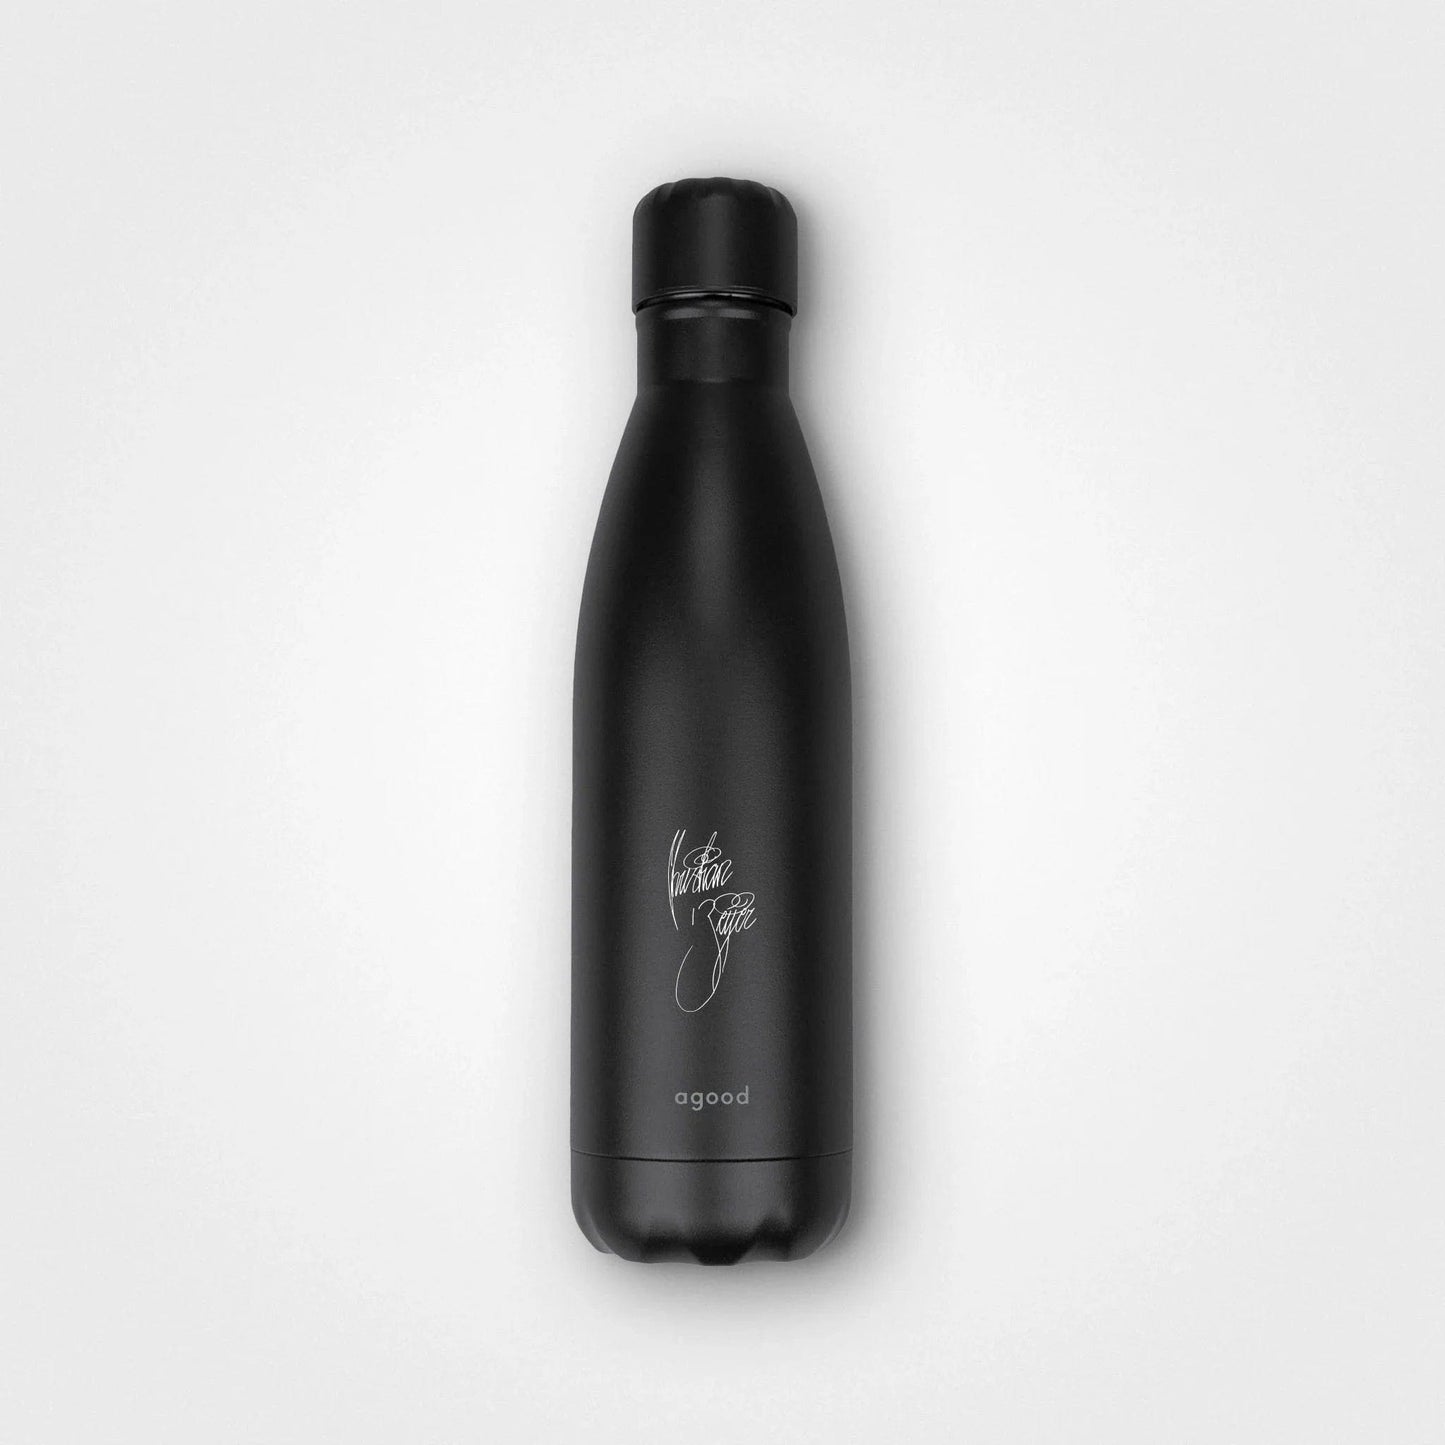 Thermal bottle made from recycled steel, Christian Beijer, Jimmy Hendrix